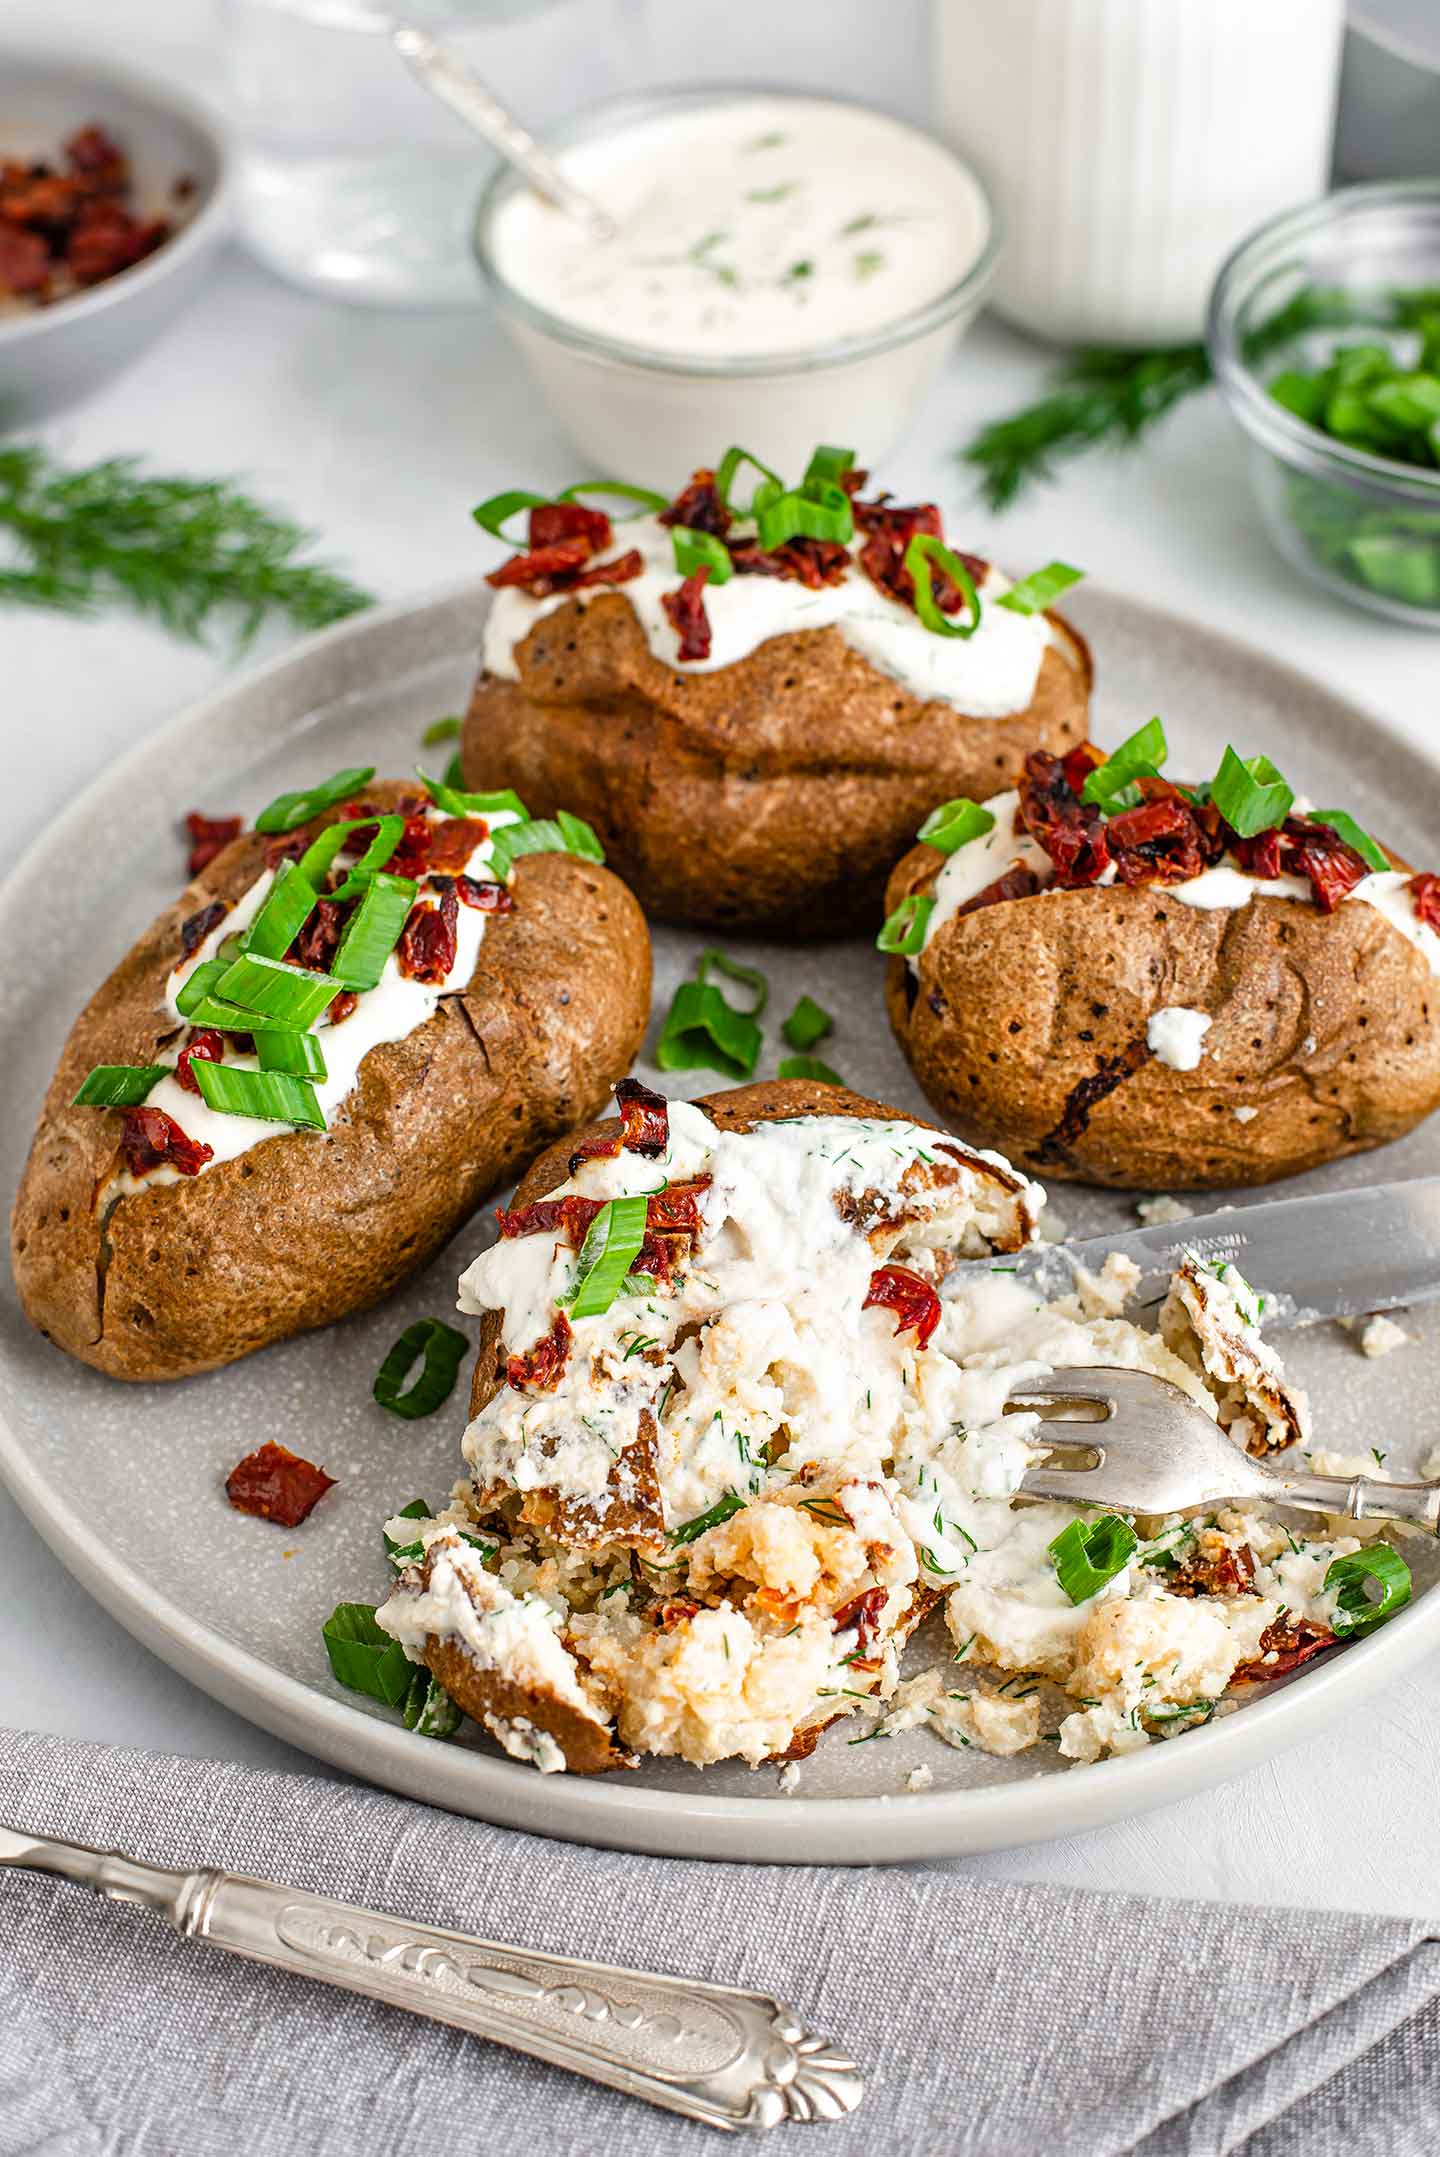 Three loaded potatoes and one smashed potato are on a plate. A fork rests in the smashed potato. Soft potato mixes with sour cream, sun-dried tomato bits, and green onion.